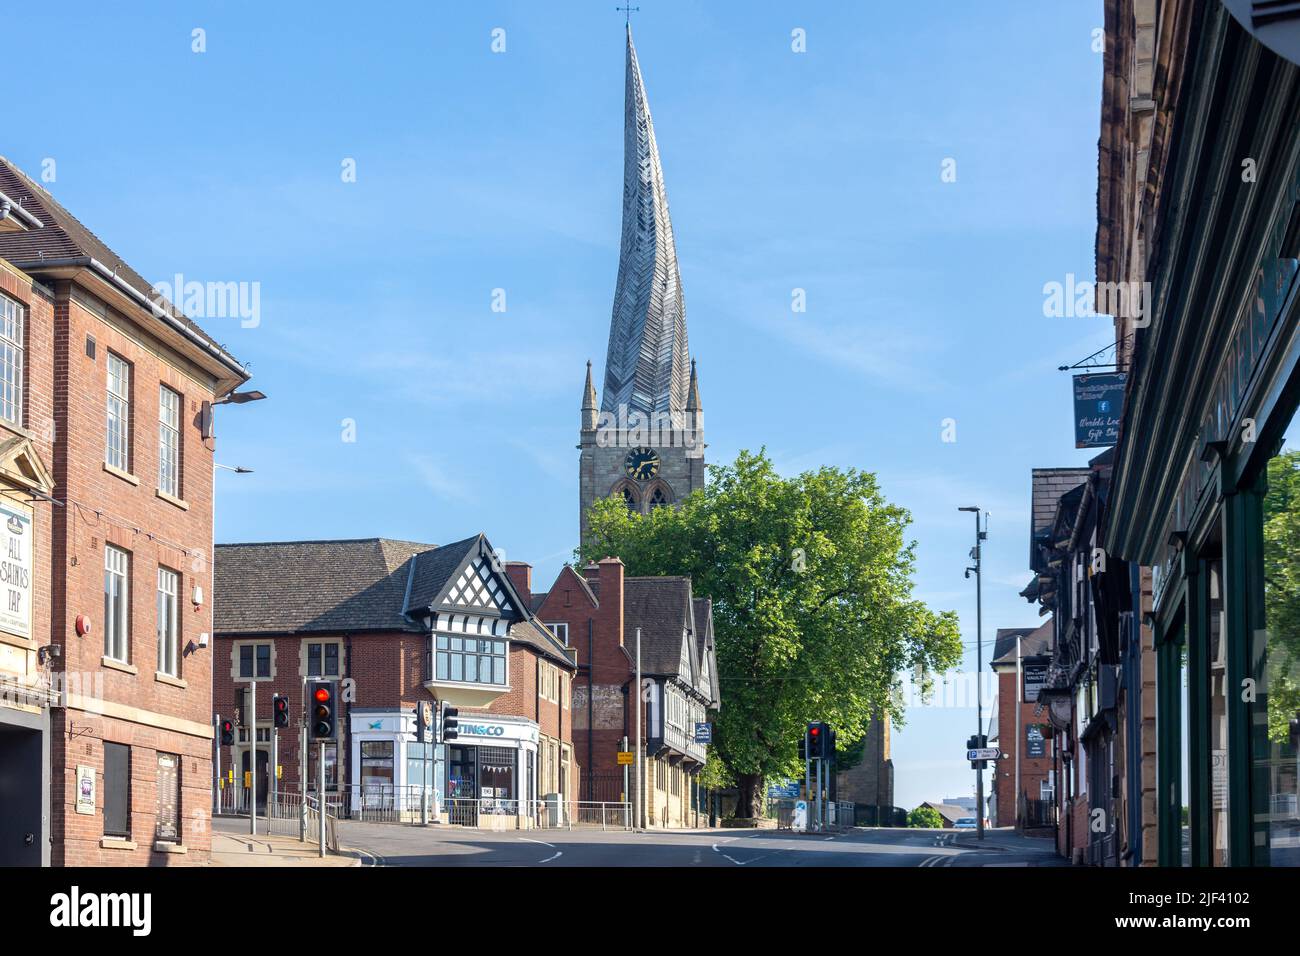 Church of Our Lady and All Saints from St Mary's Gate, Chesterfield, Derbyshire, England, United Kingdom Stock Photo